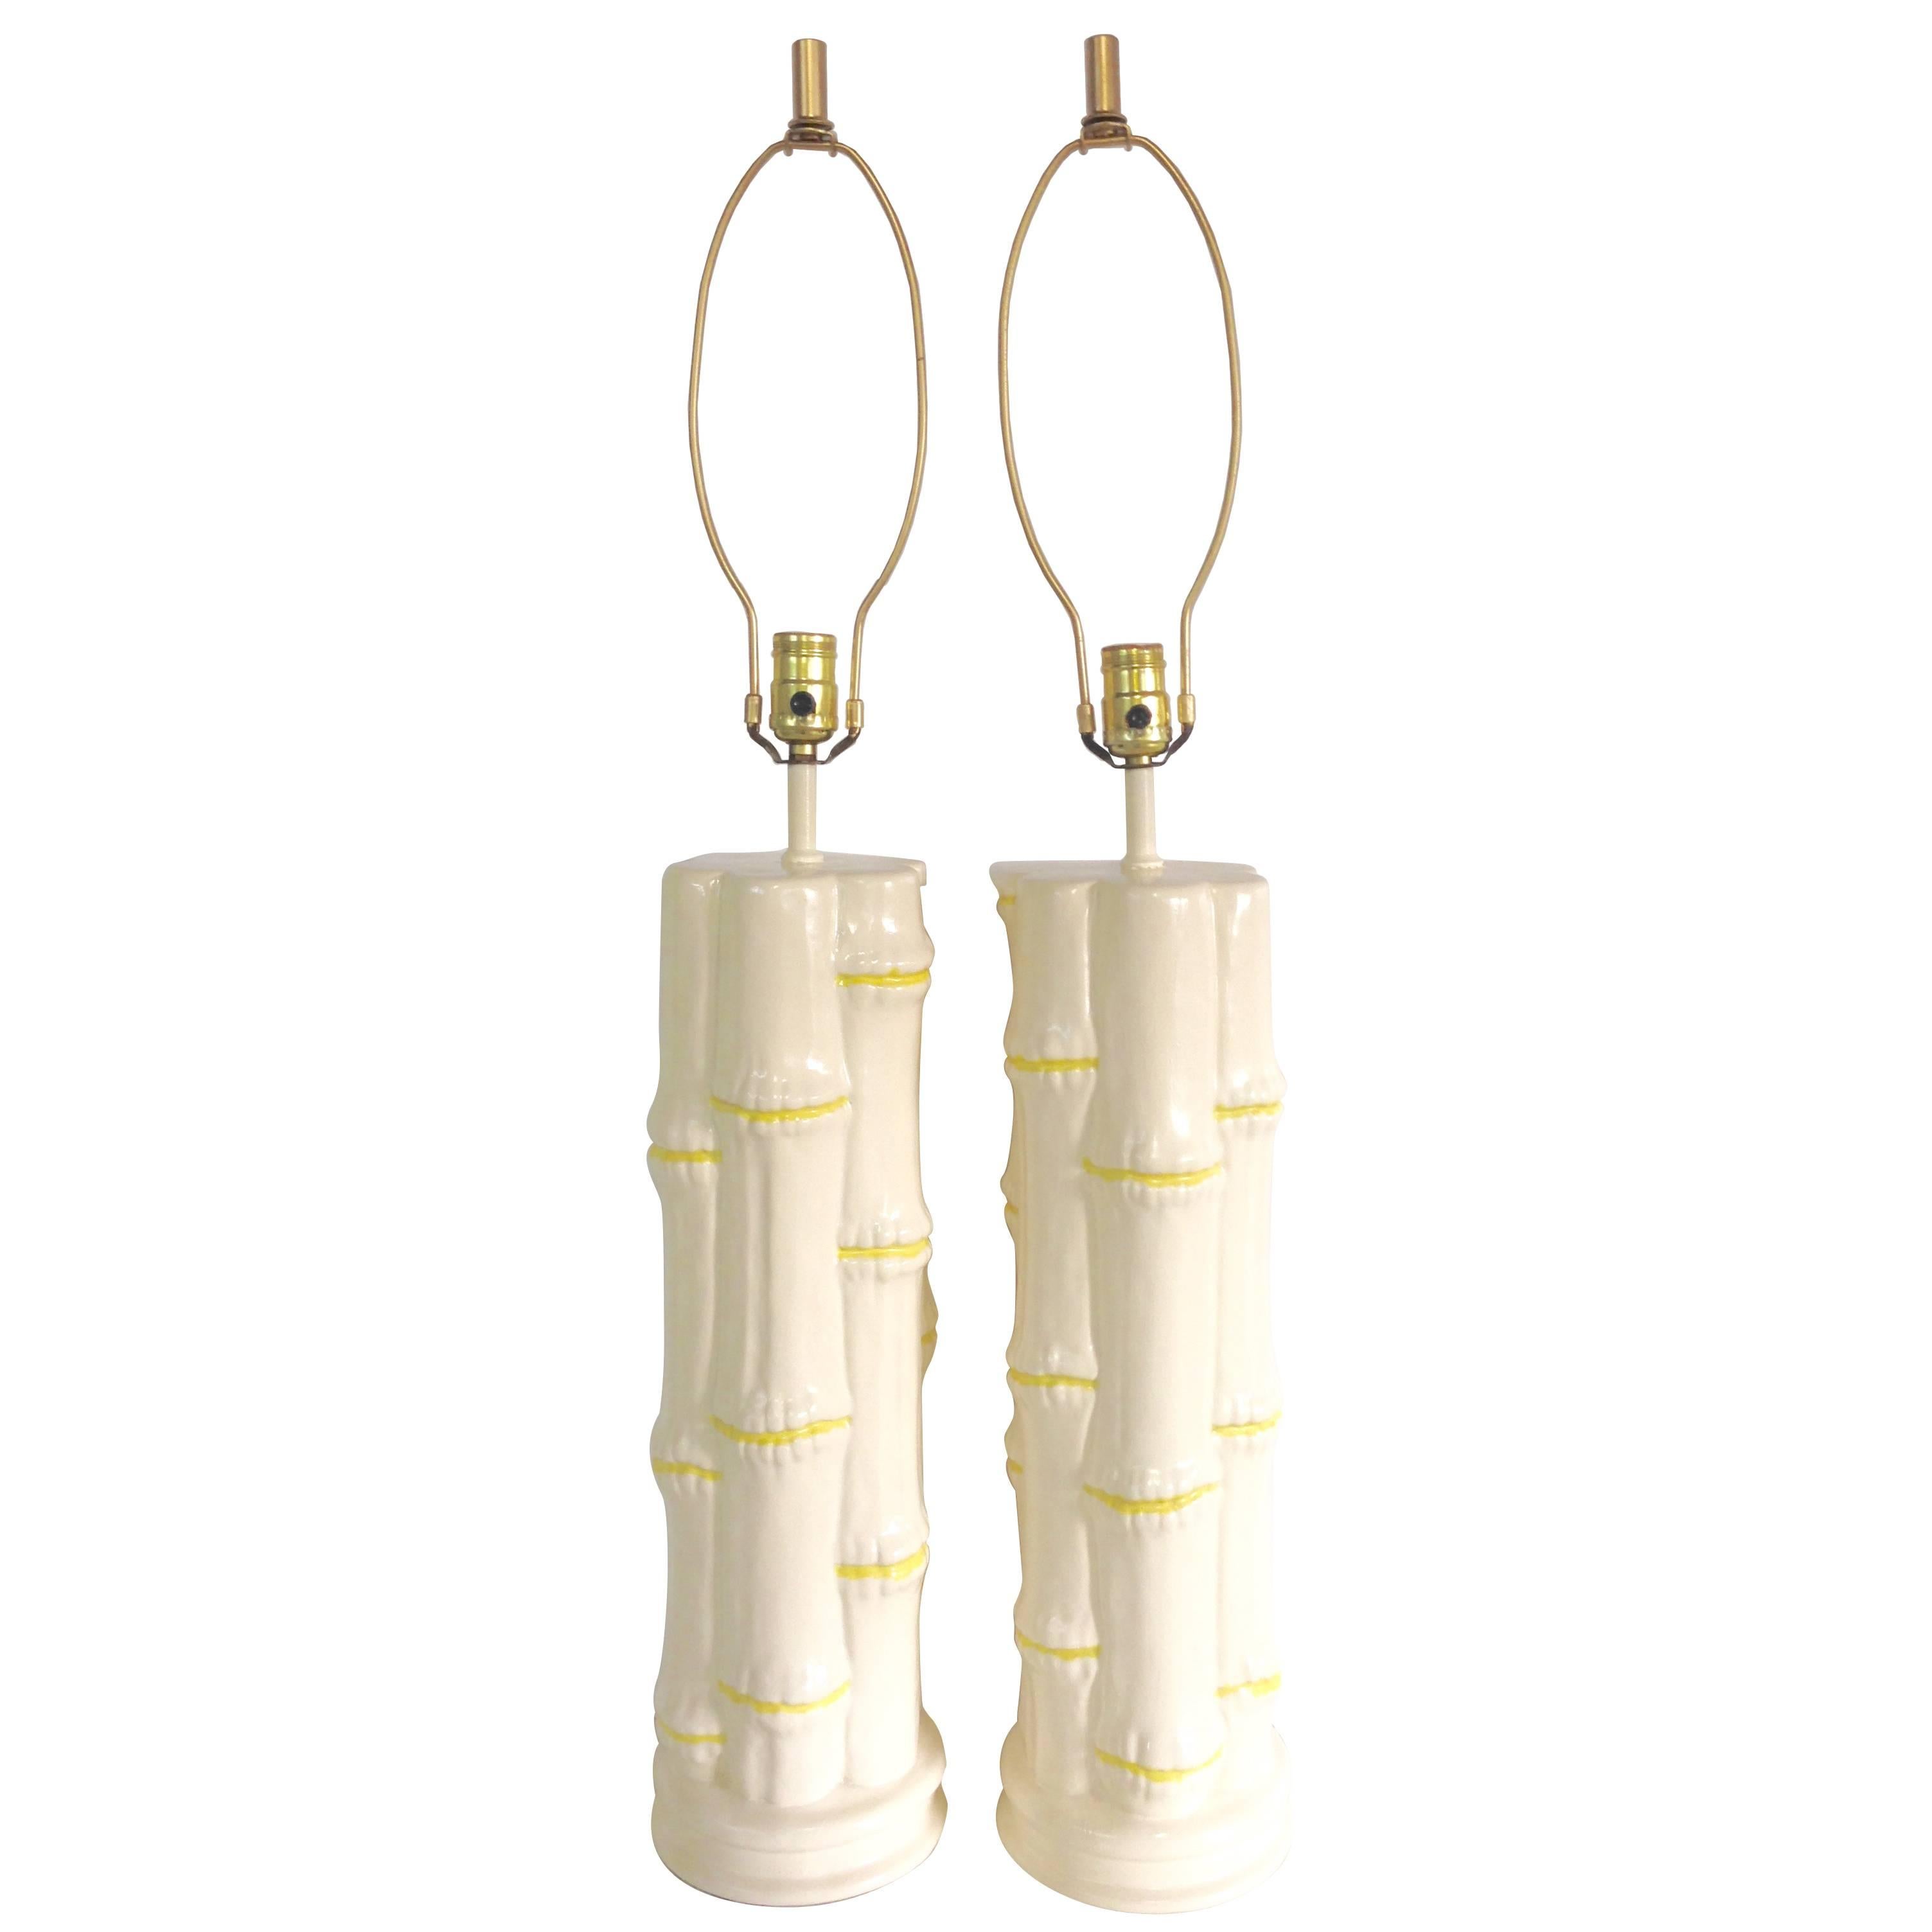 1960'S Pair Of Hollywood Regency tall ceramic glaze white and yellow faux bamboo table lamps. Features original brass fittings. Includes pair of brass finial and harps. Wired for the US and in working order. Takes a standard light bulb, max watts